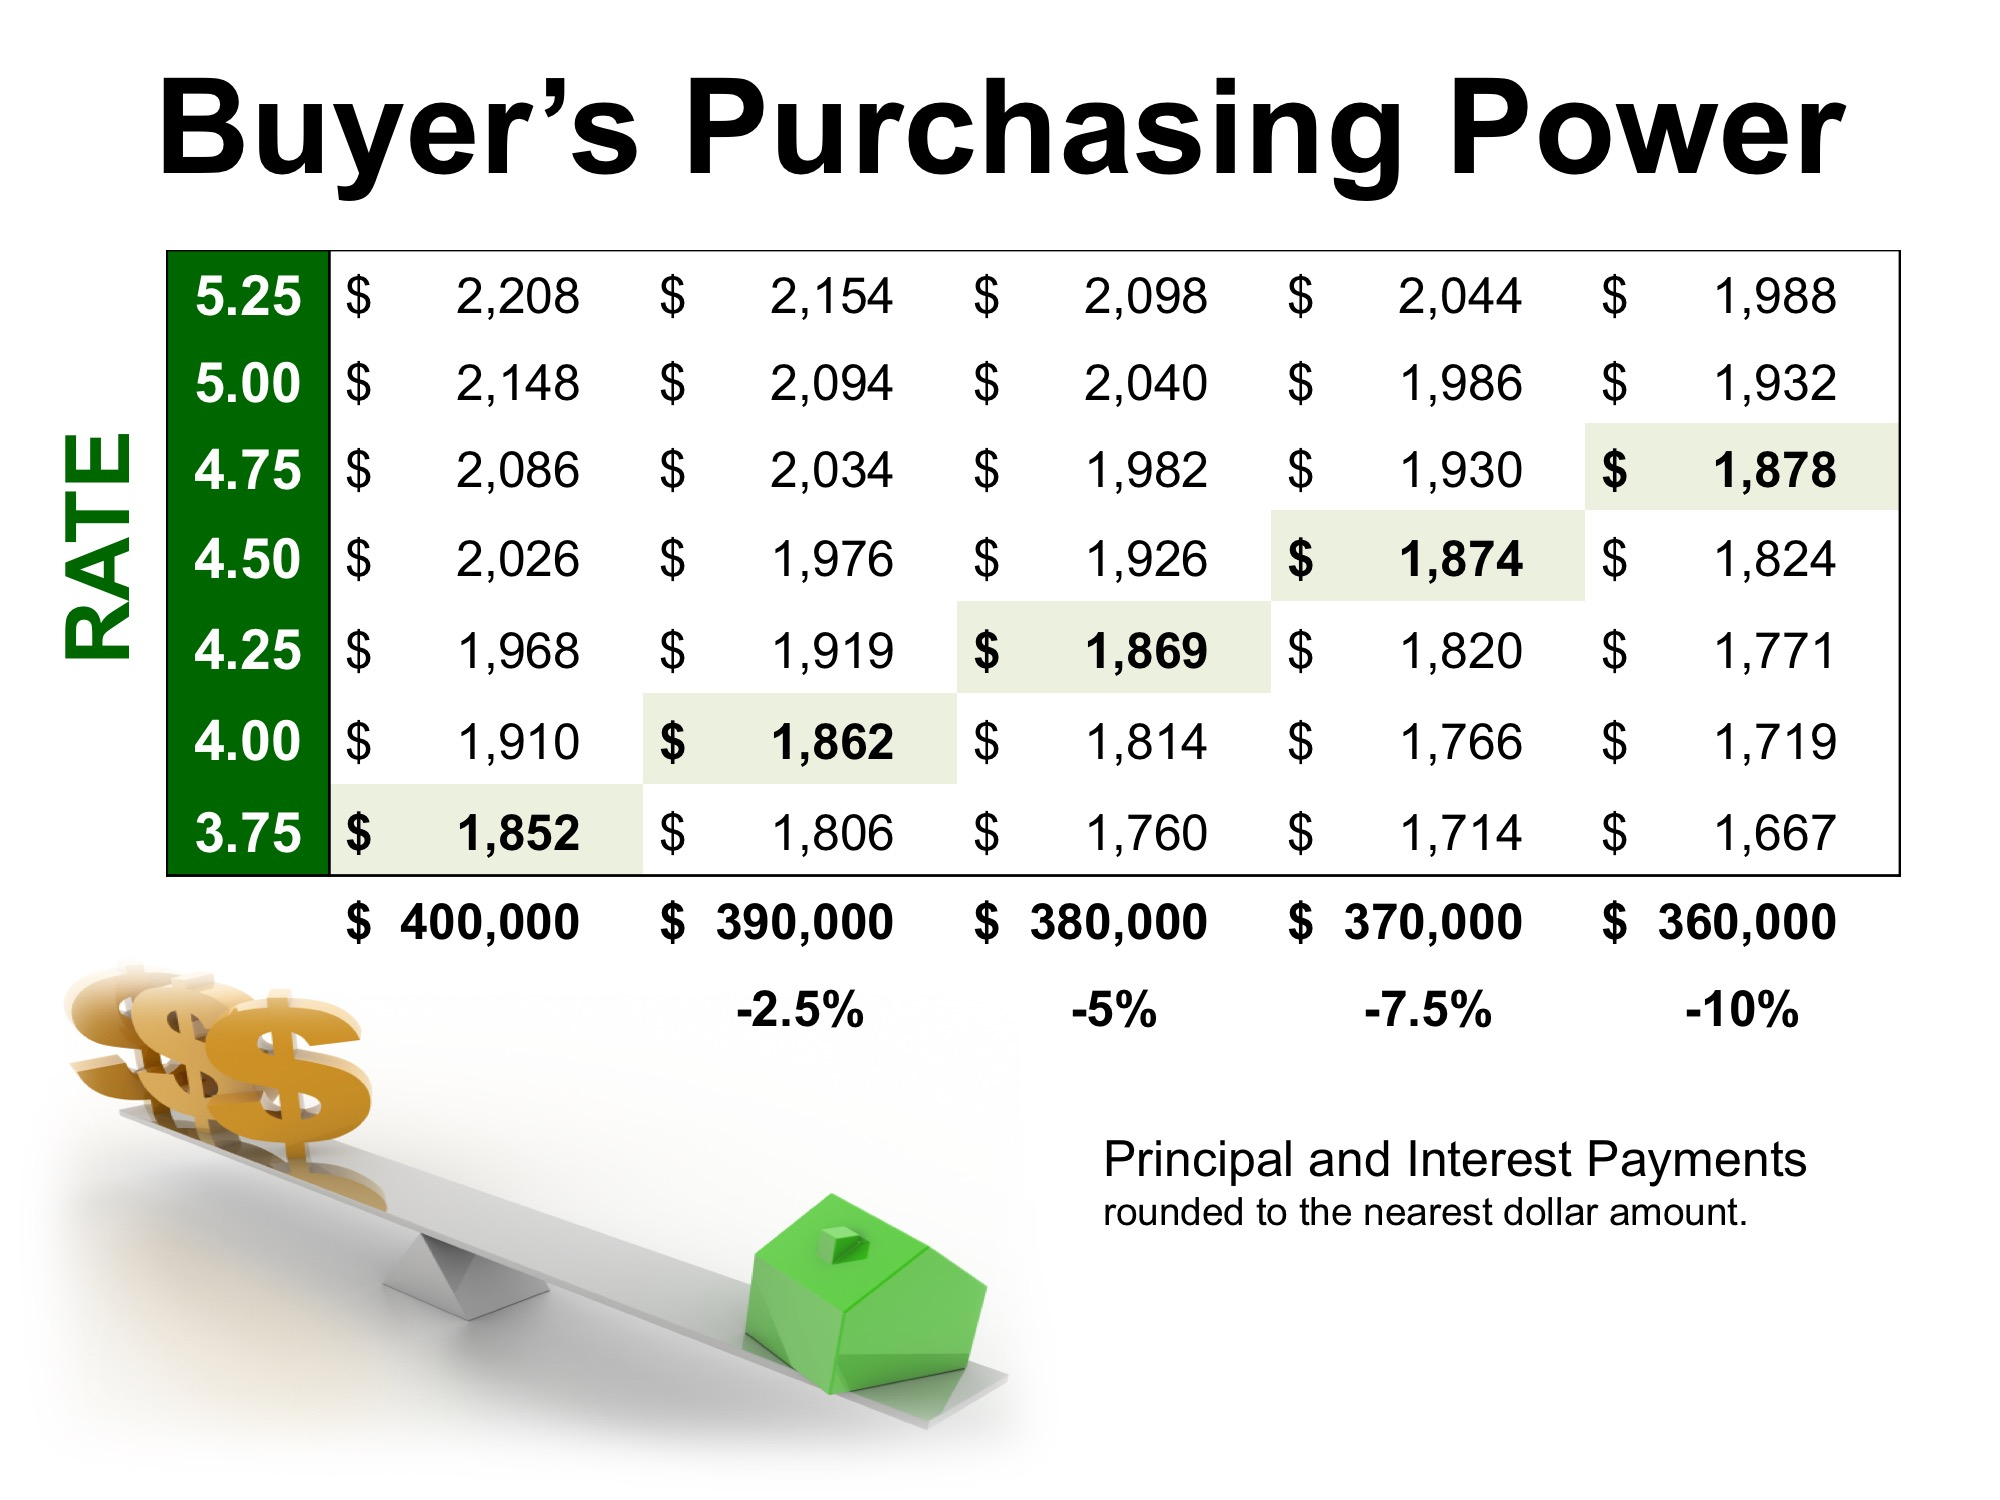 How Current Interest Rates Can Have a High Impact on Your Purchasing Power